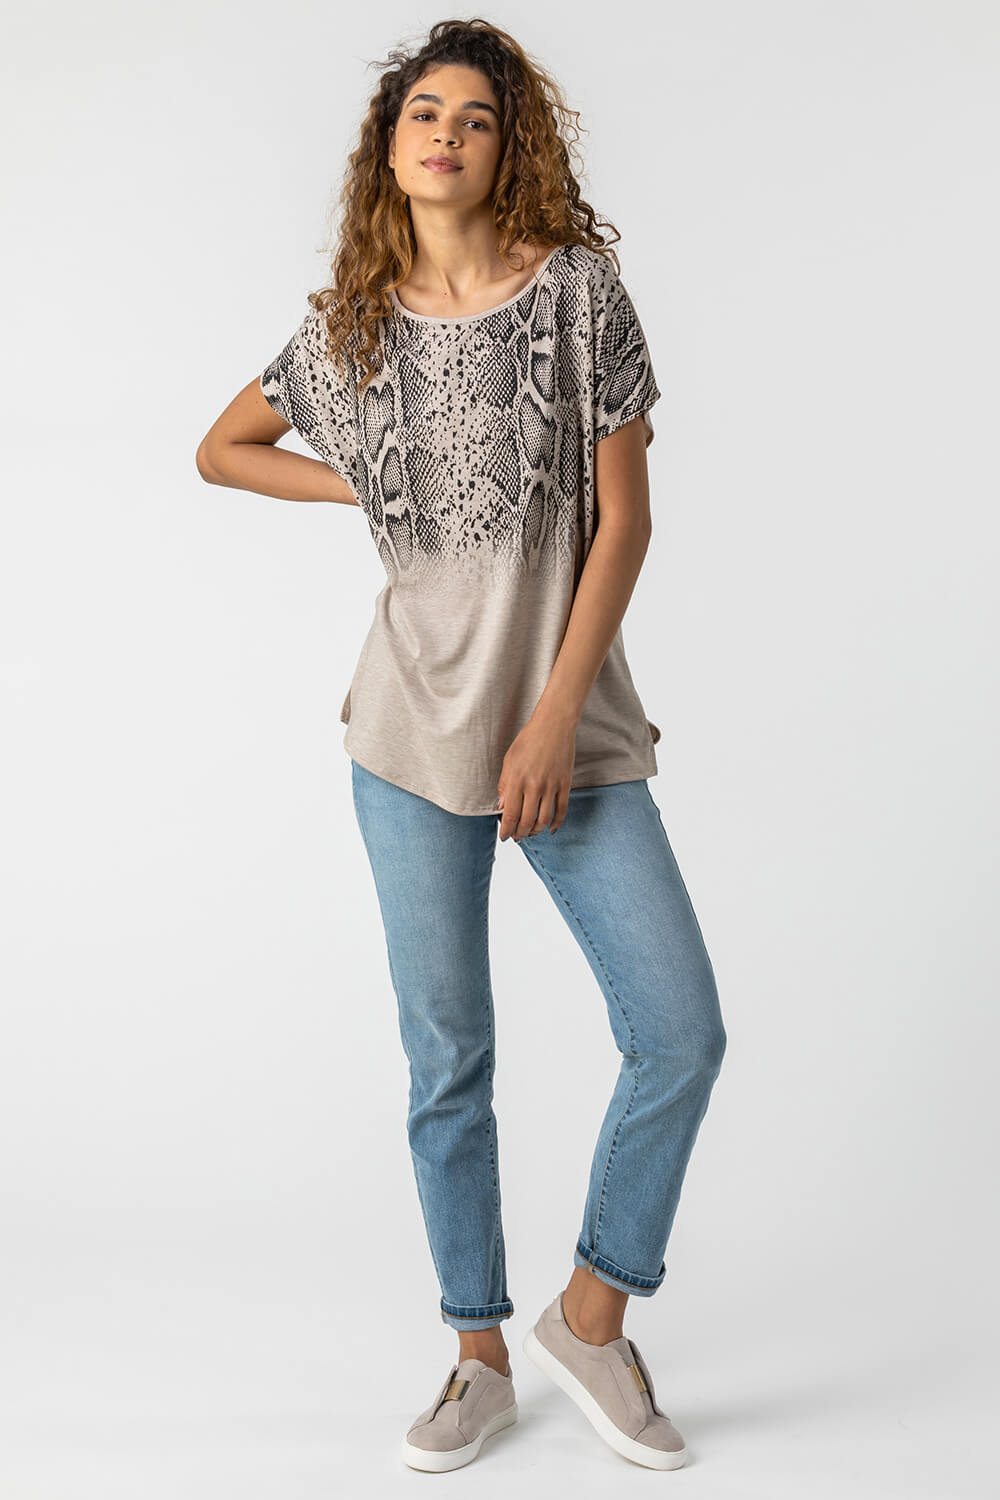 Neutral Snake Print Ombre Top, Image 3 of 5